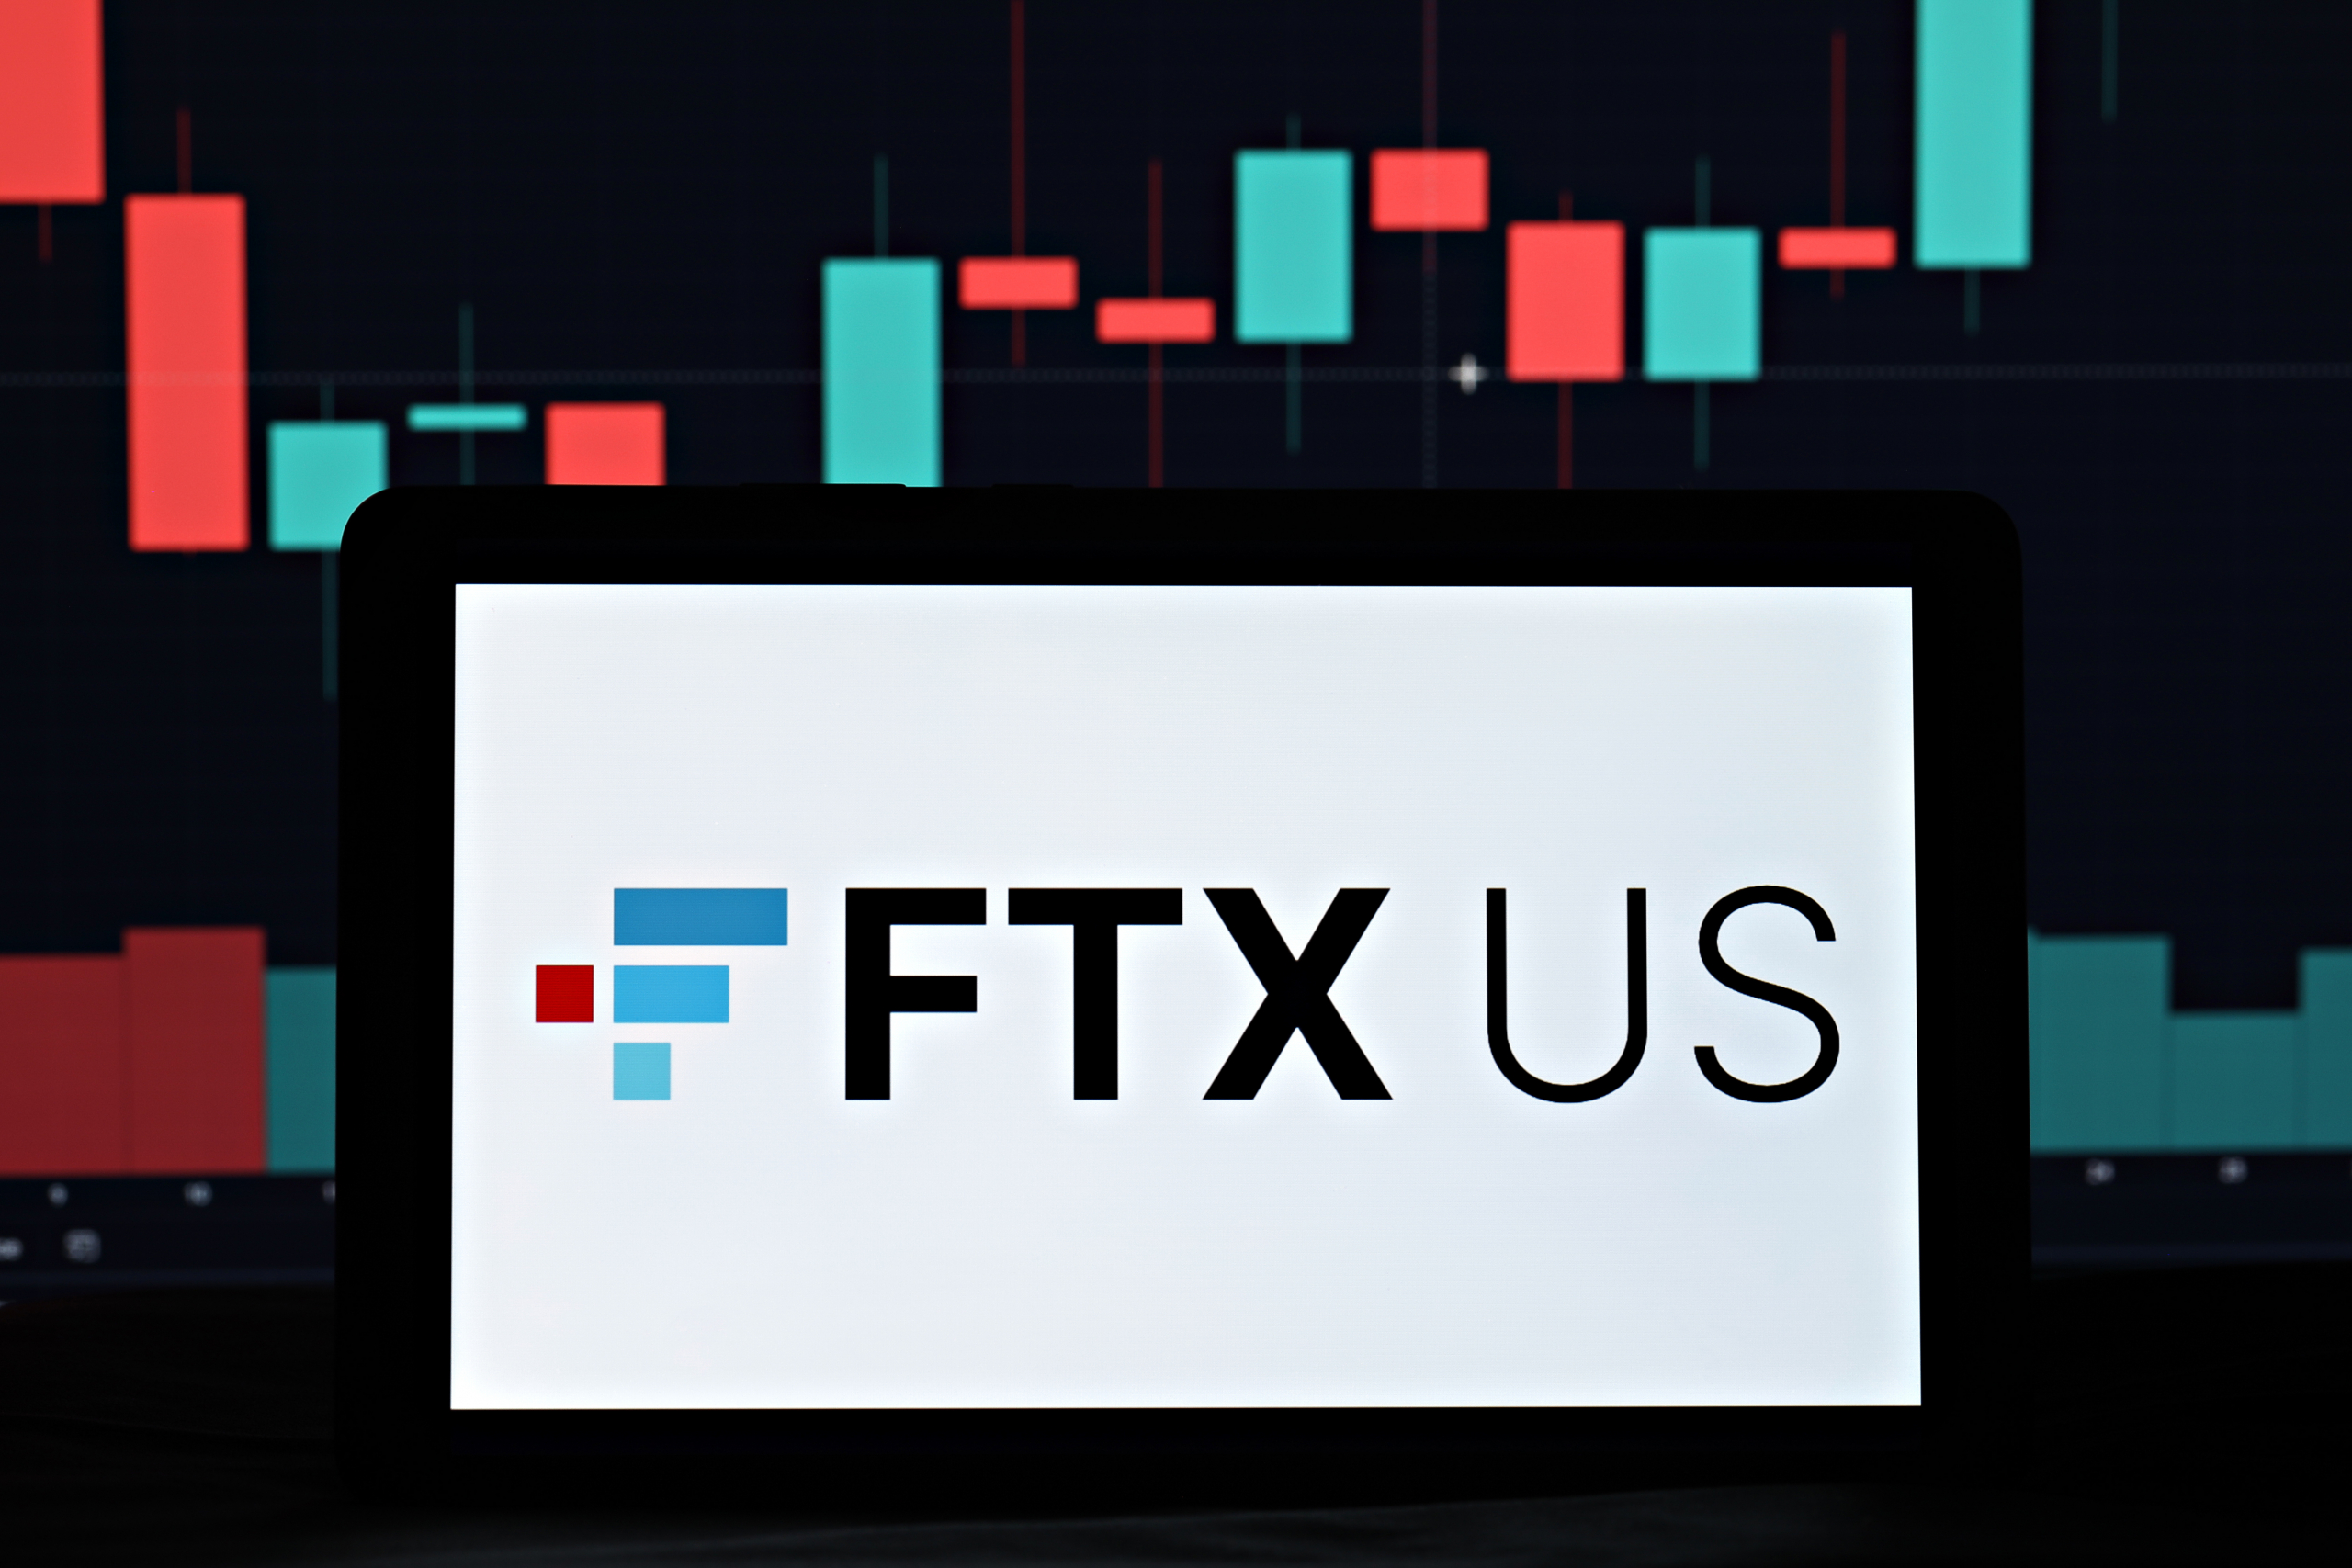 FTX US launches stock trading with stablecoins
